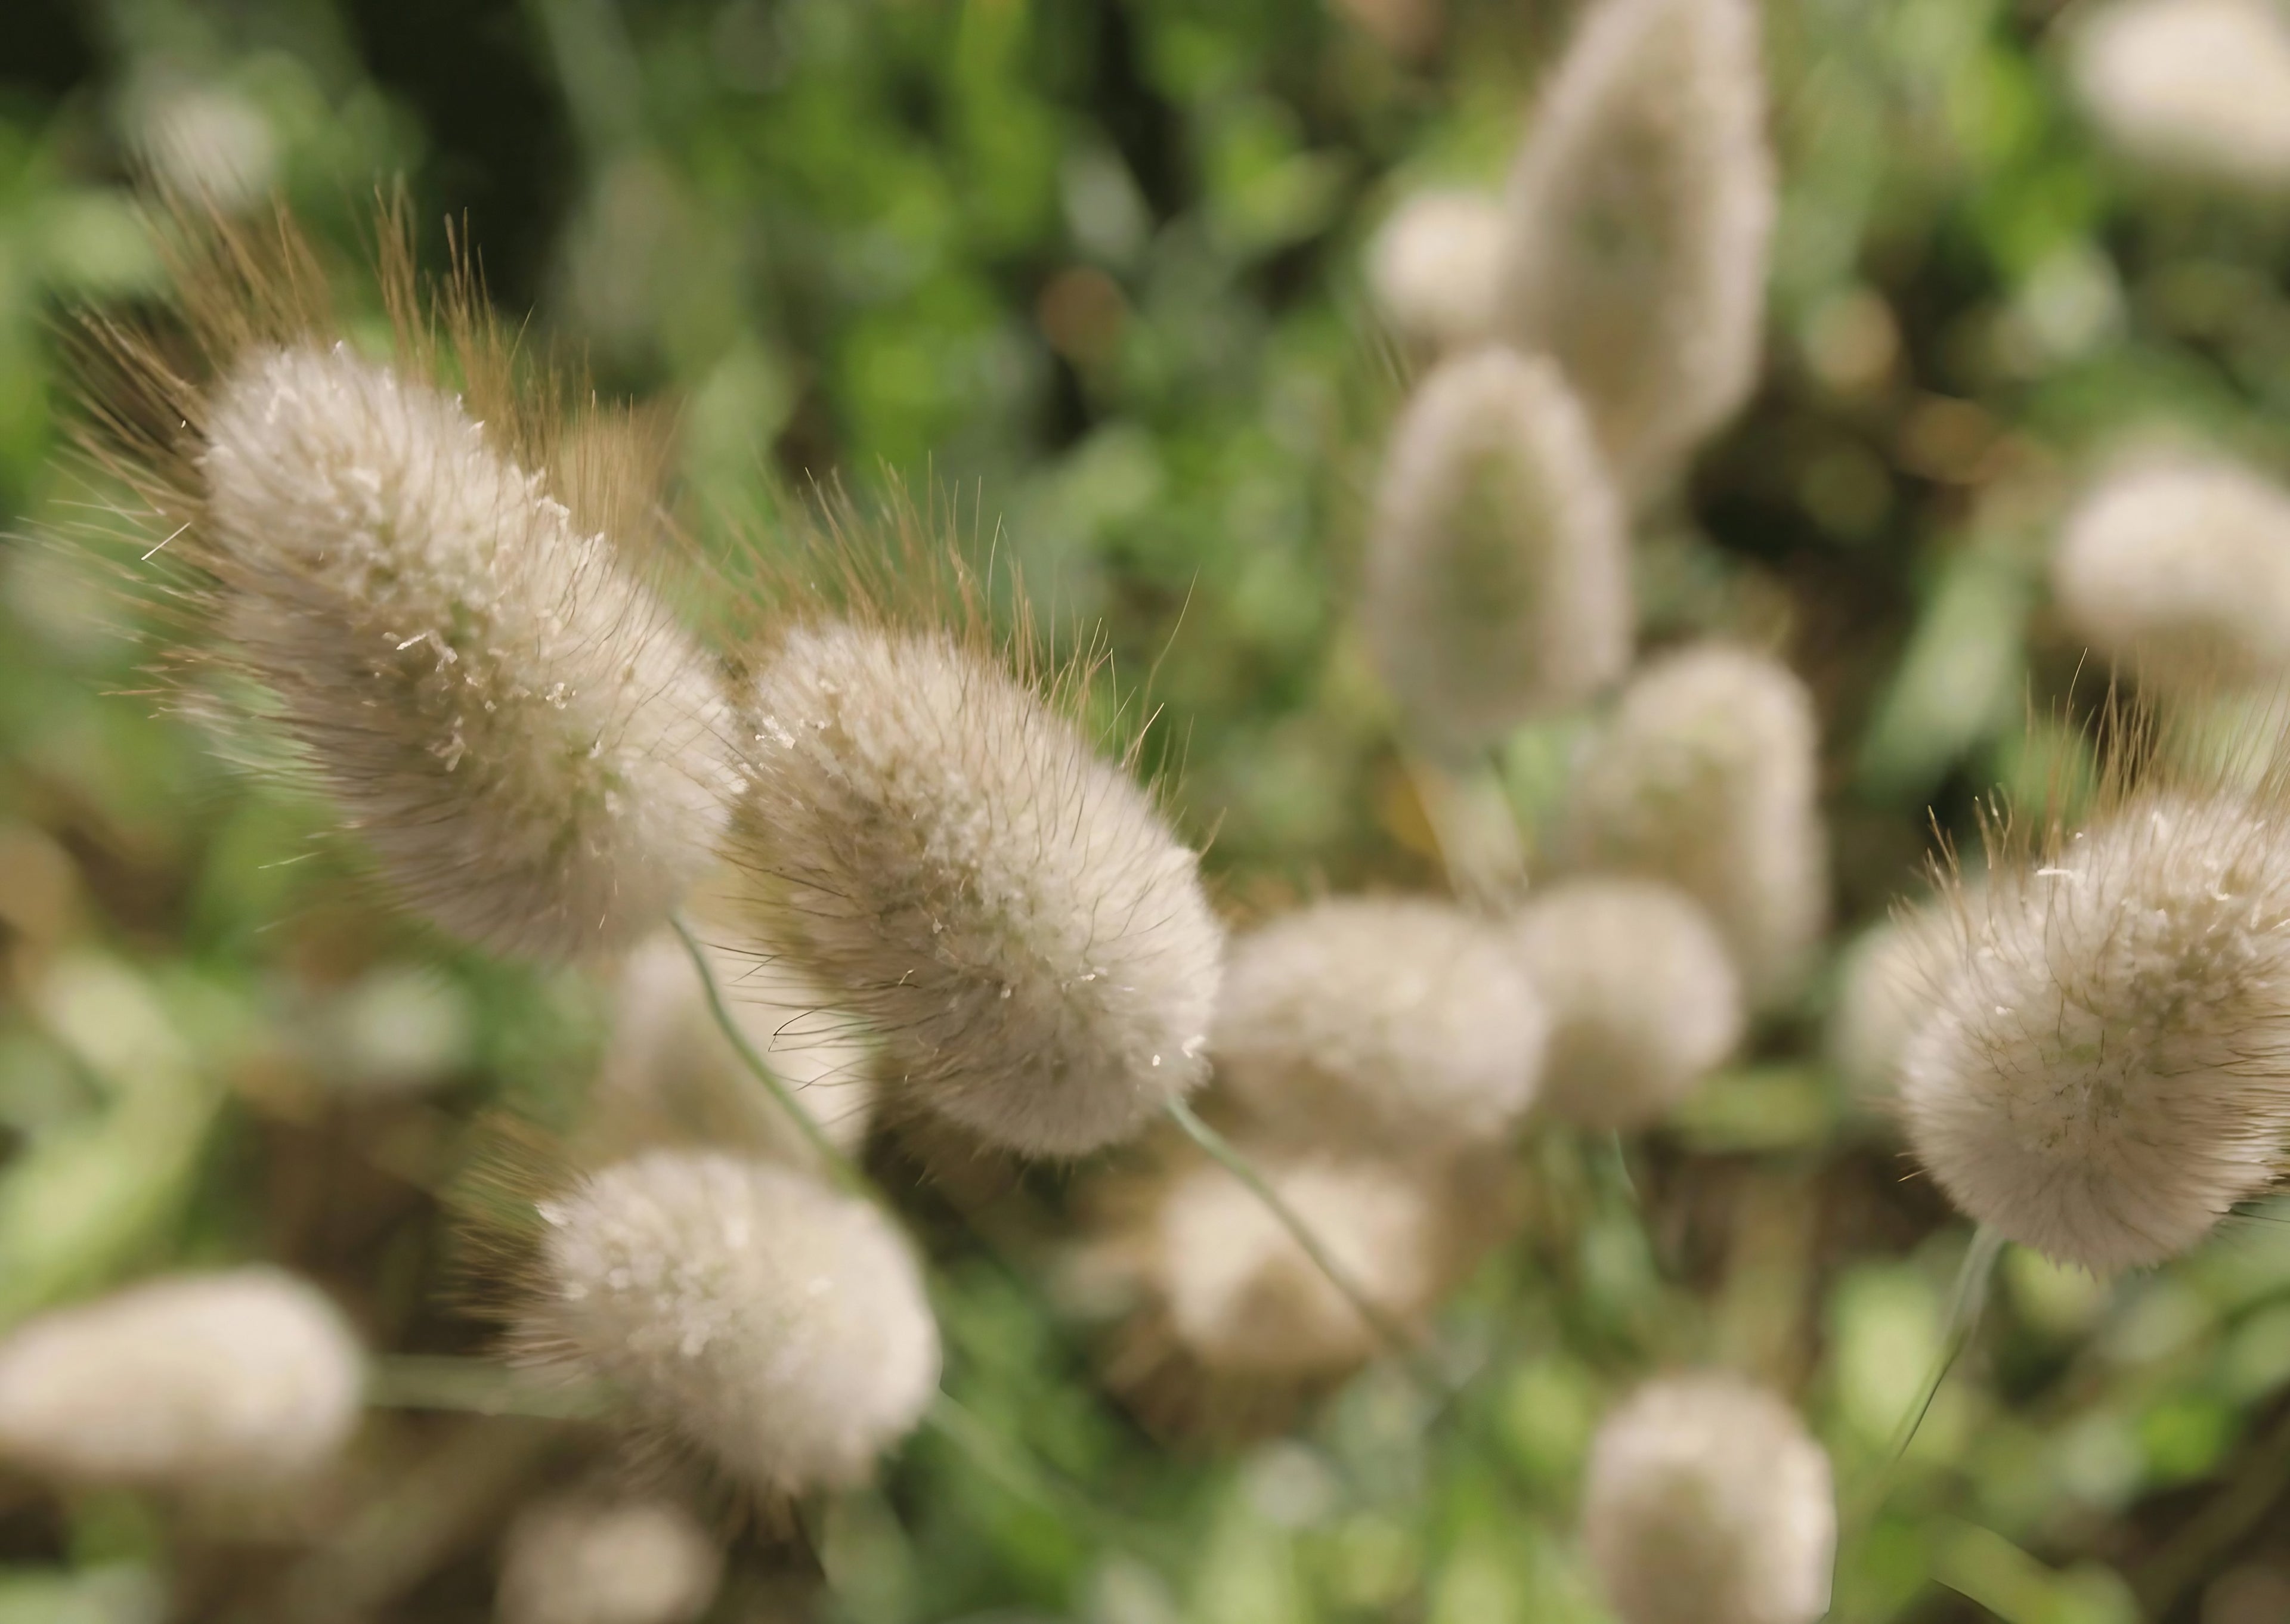 Close-up view of Bunny Tails grass, highlighting the soft, white tufts